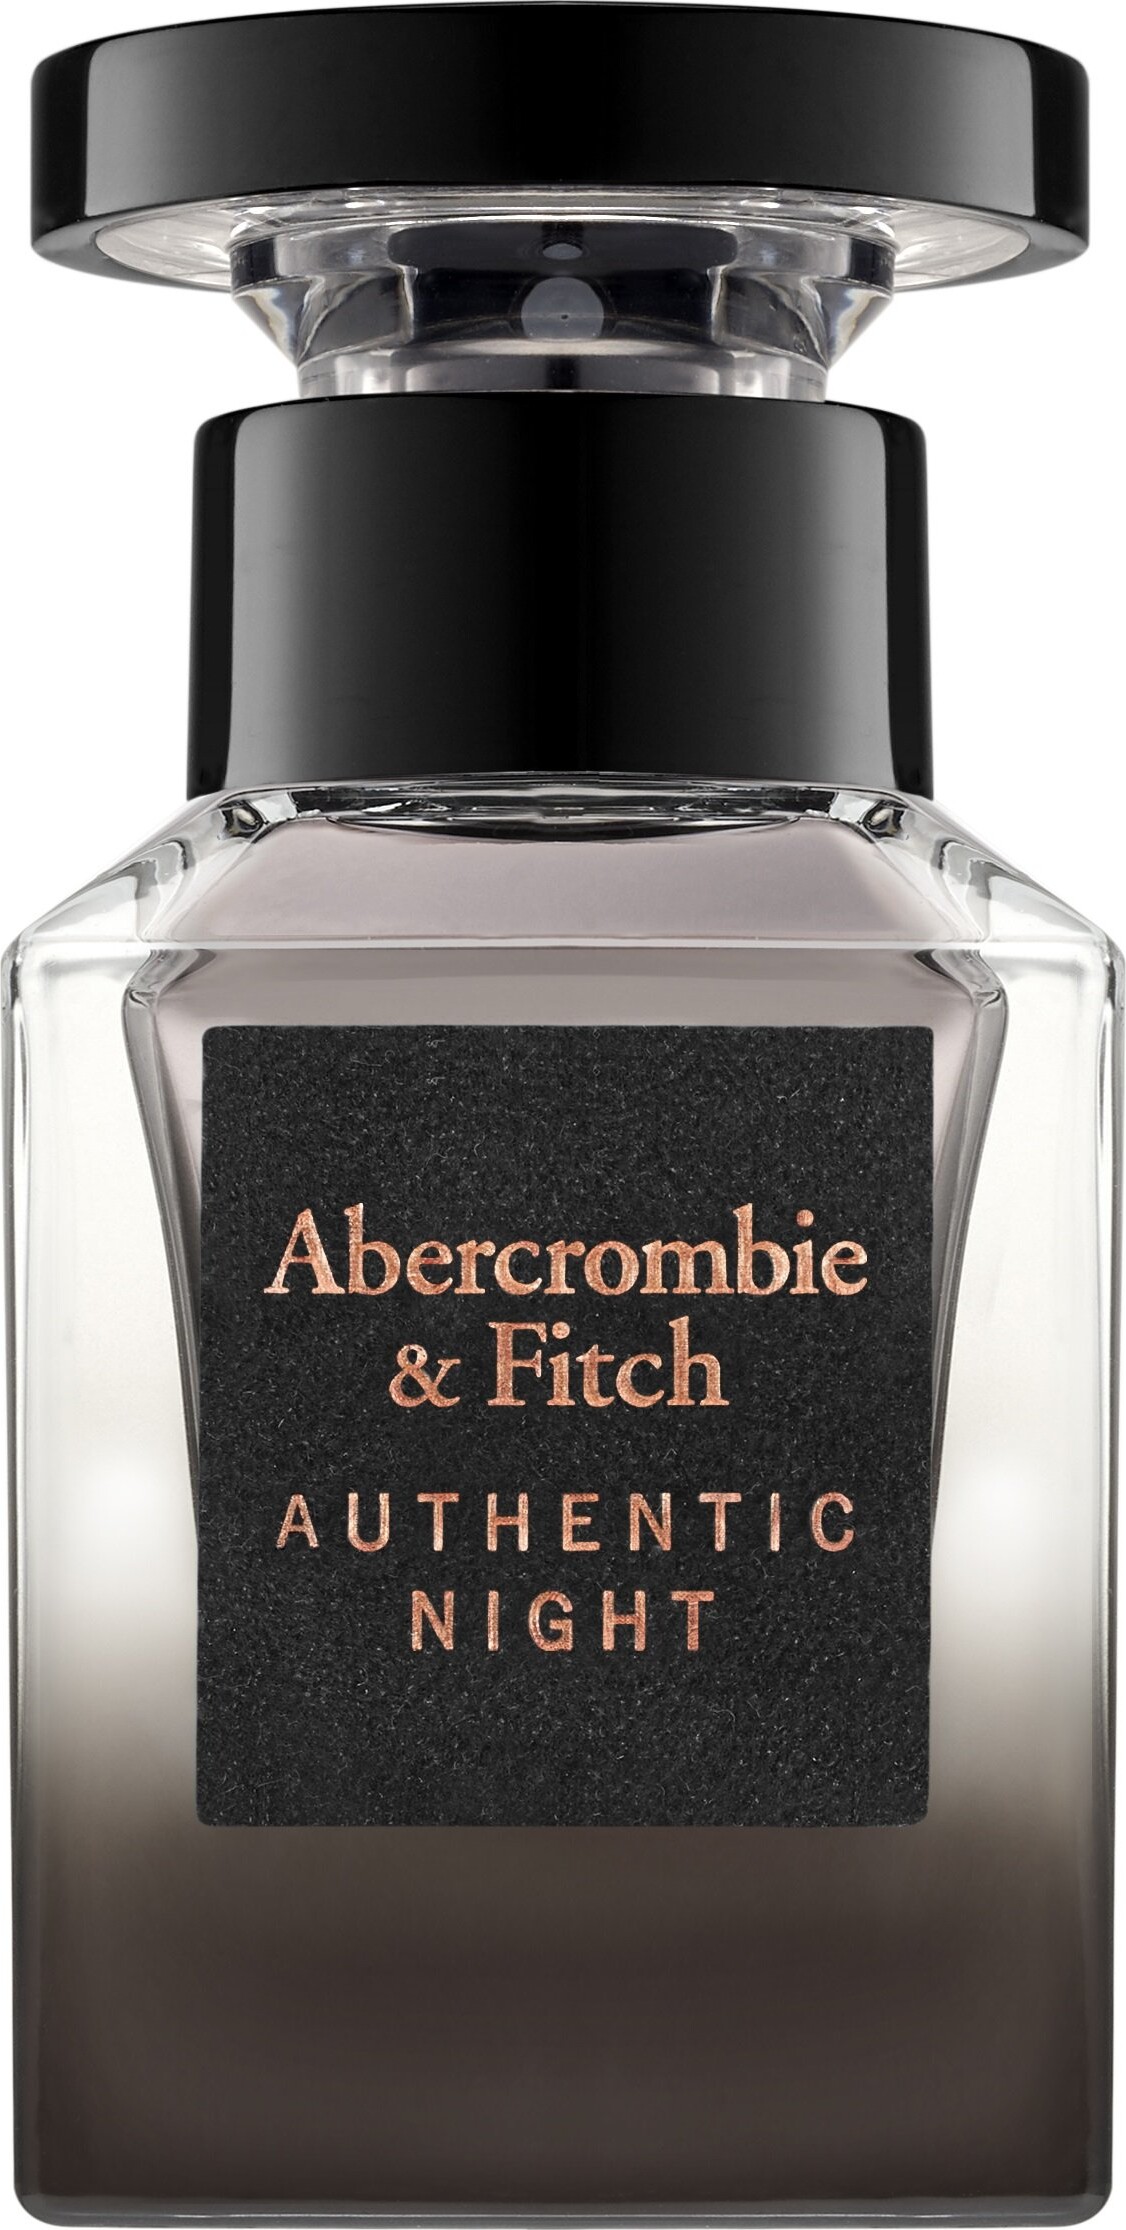 Se Abercrombie & Fitch - Authentic Night Man Edt 30 Ml hos Gucca.dk